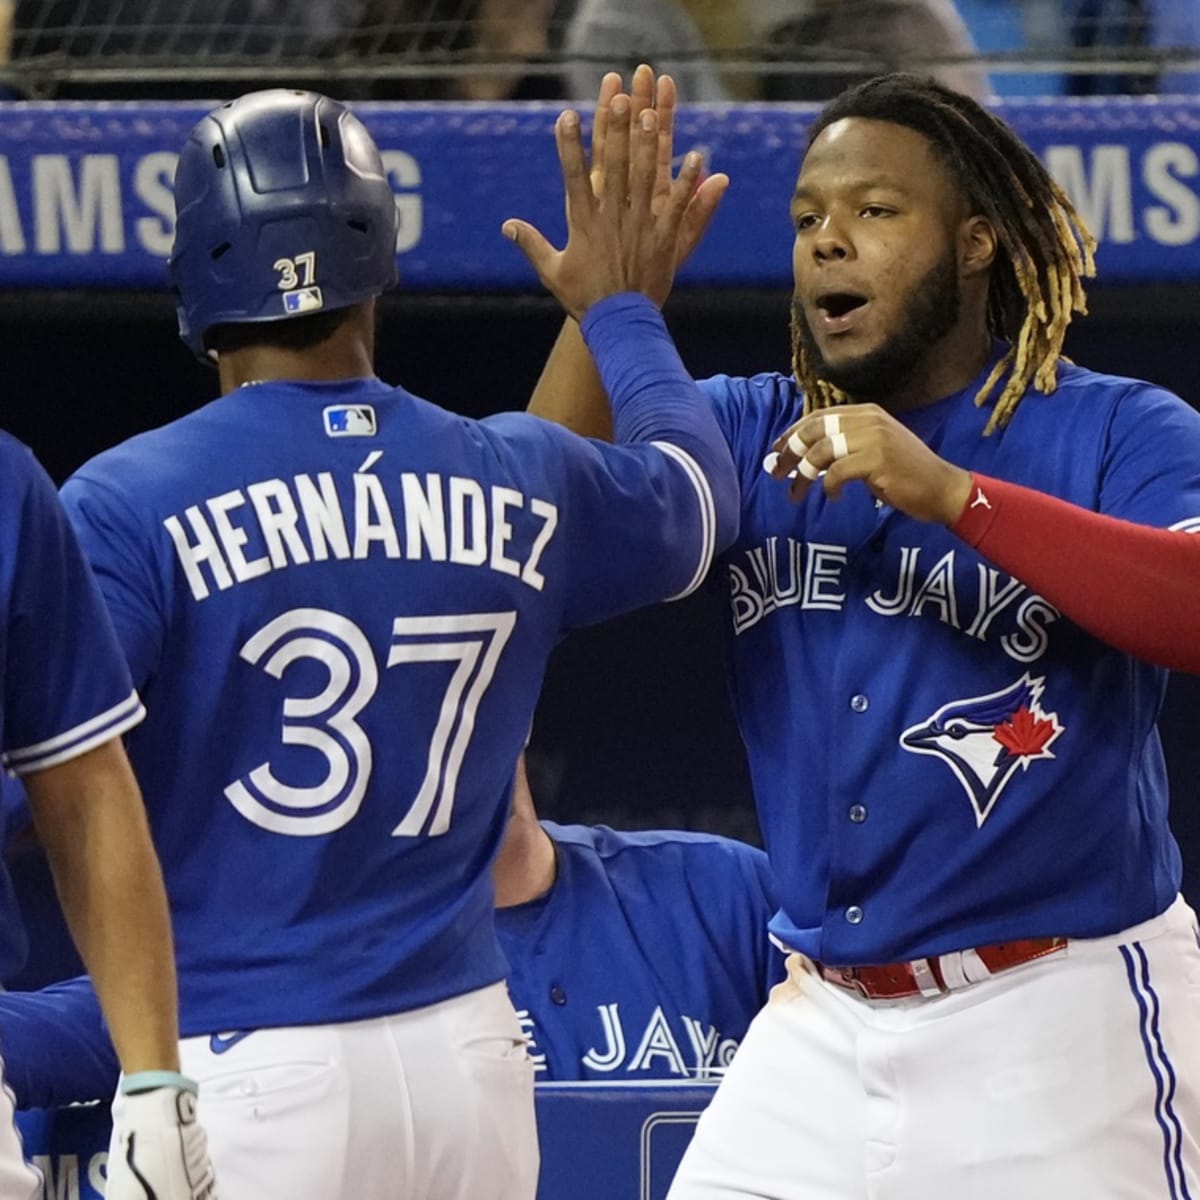 Blue Jays have new vulnerability exploited by Rays